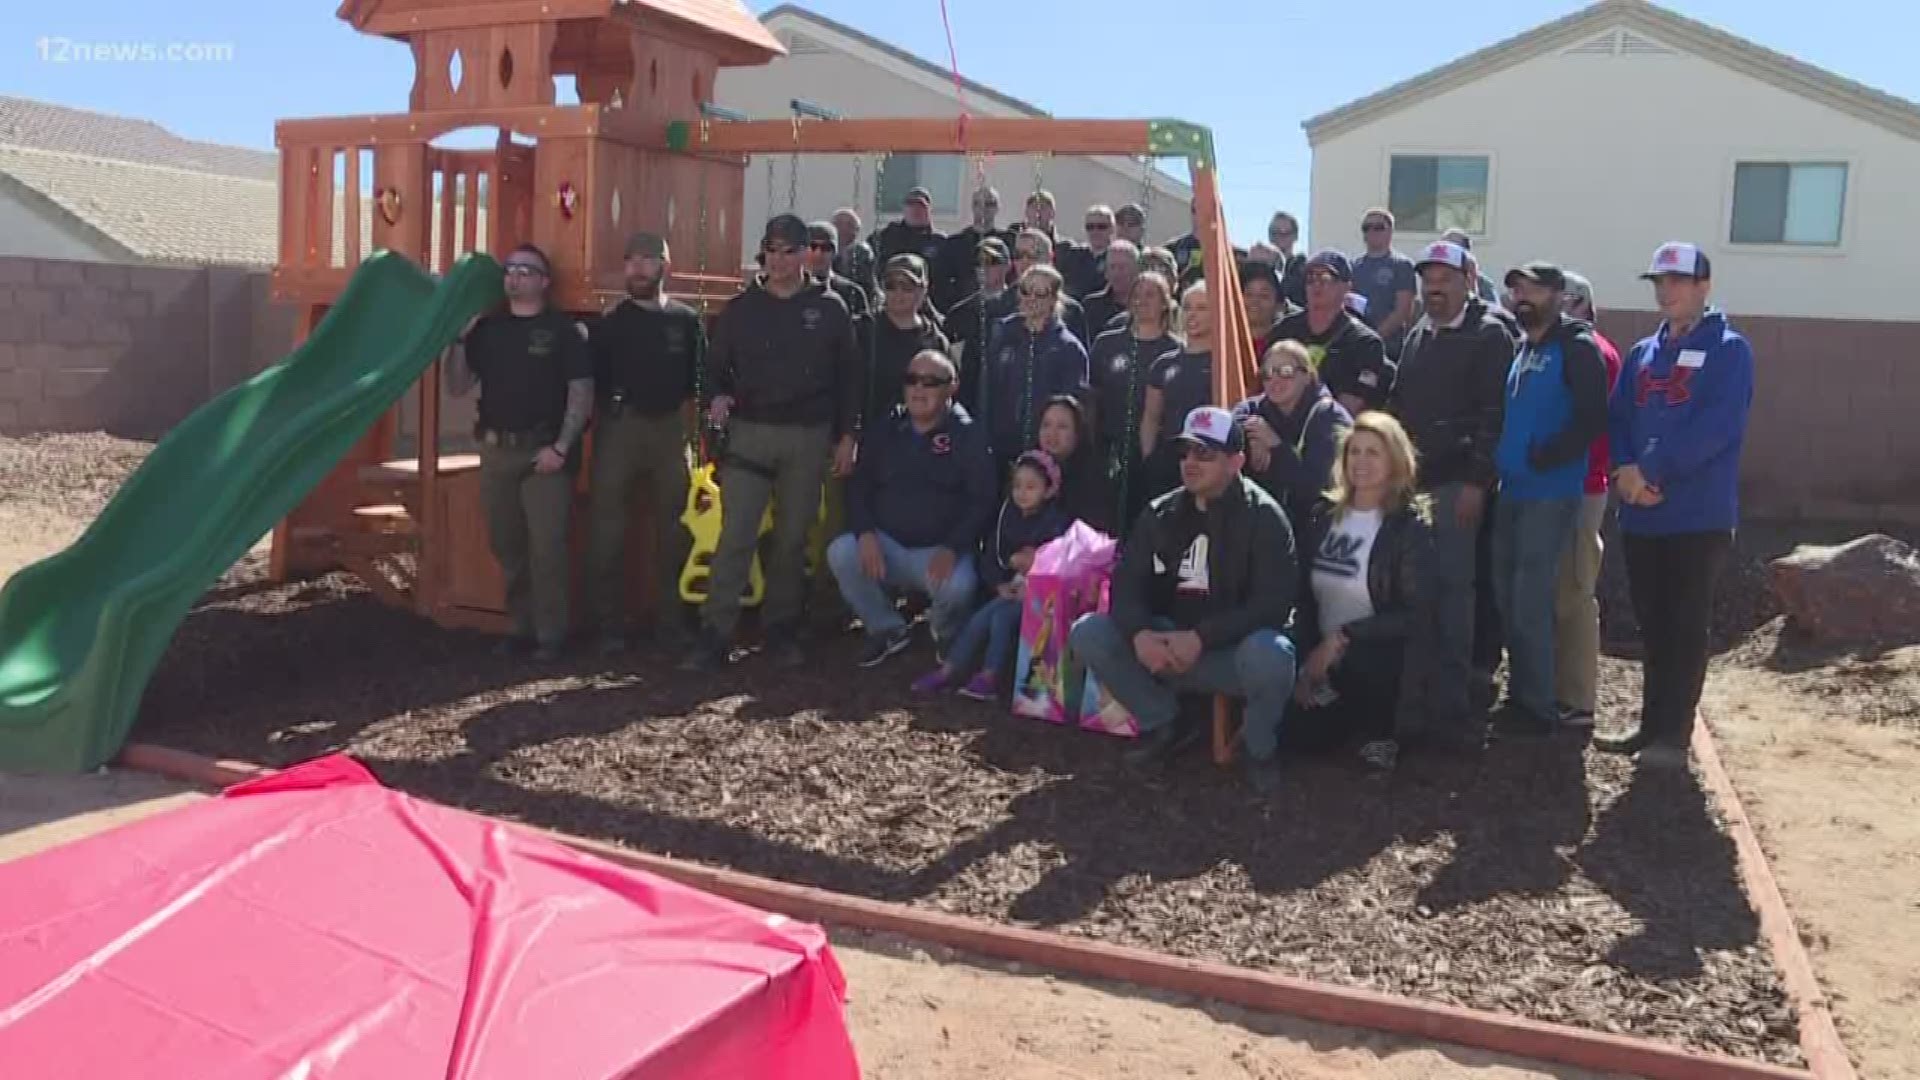 5-year-old Andrea Ortega is battling pediatric cancer and thanks to Buckeye police and fire she has a new playset to play on.